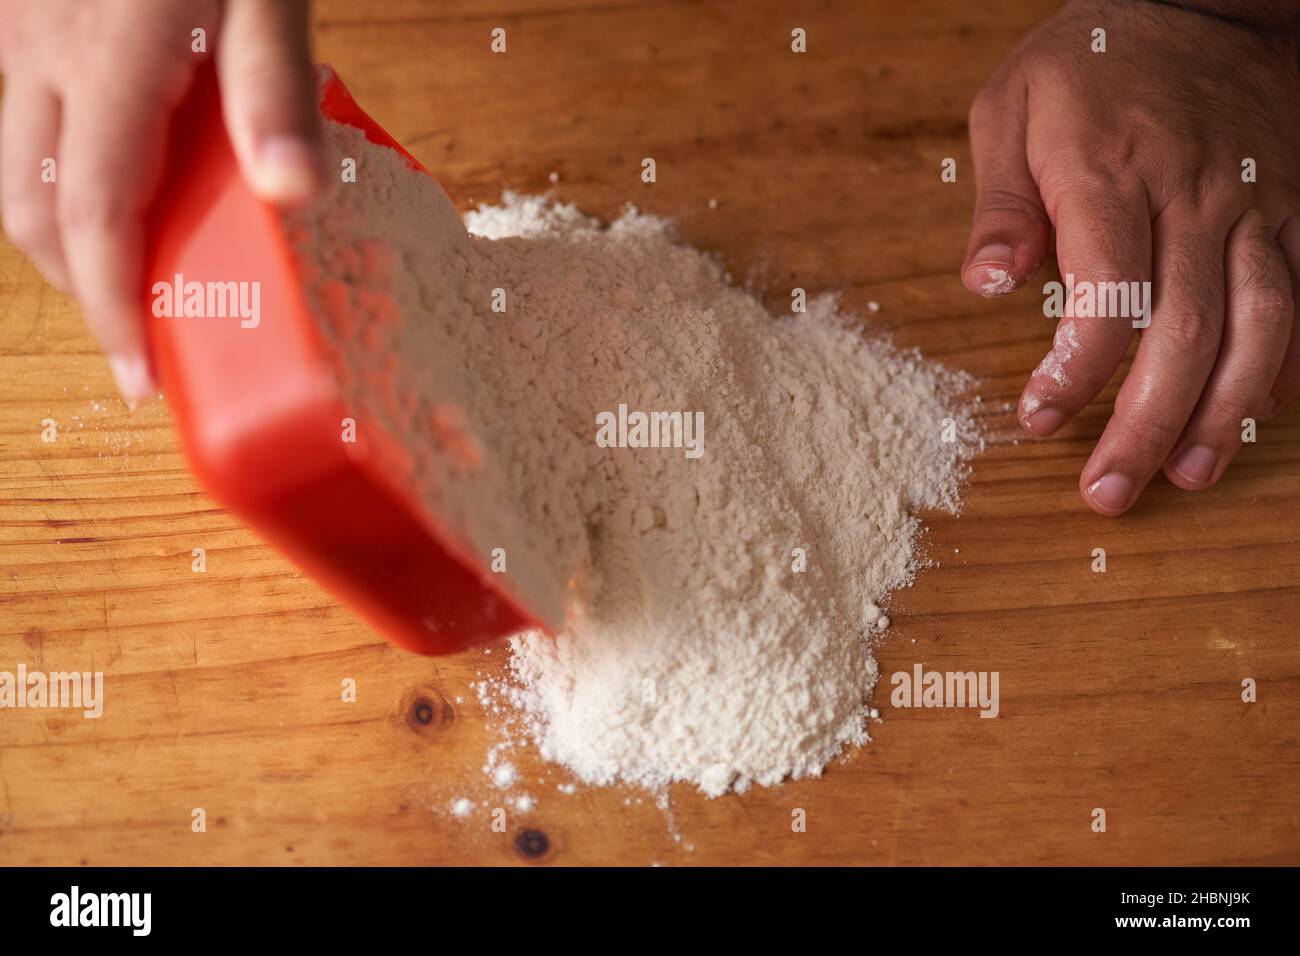 man empties portion of flour on wooden table Stock Photo